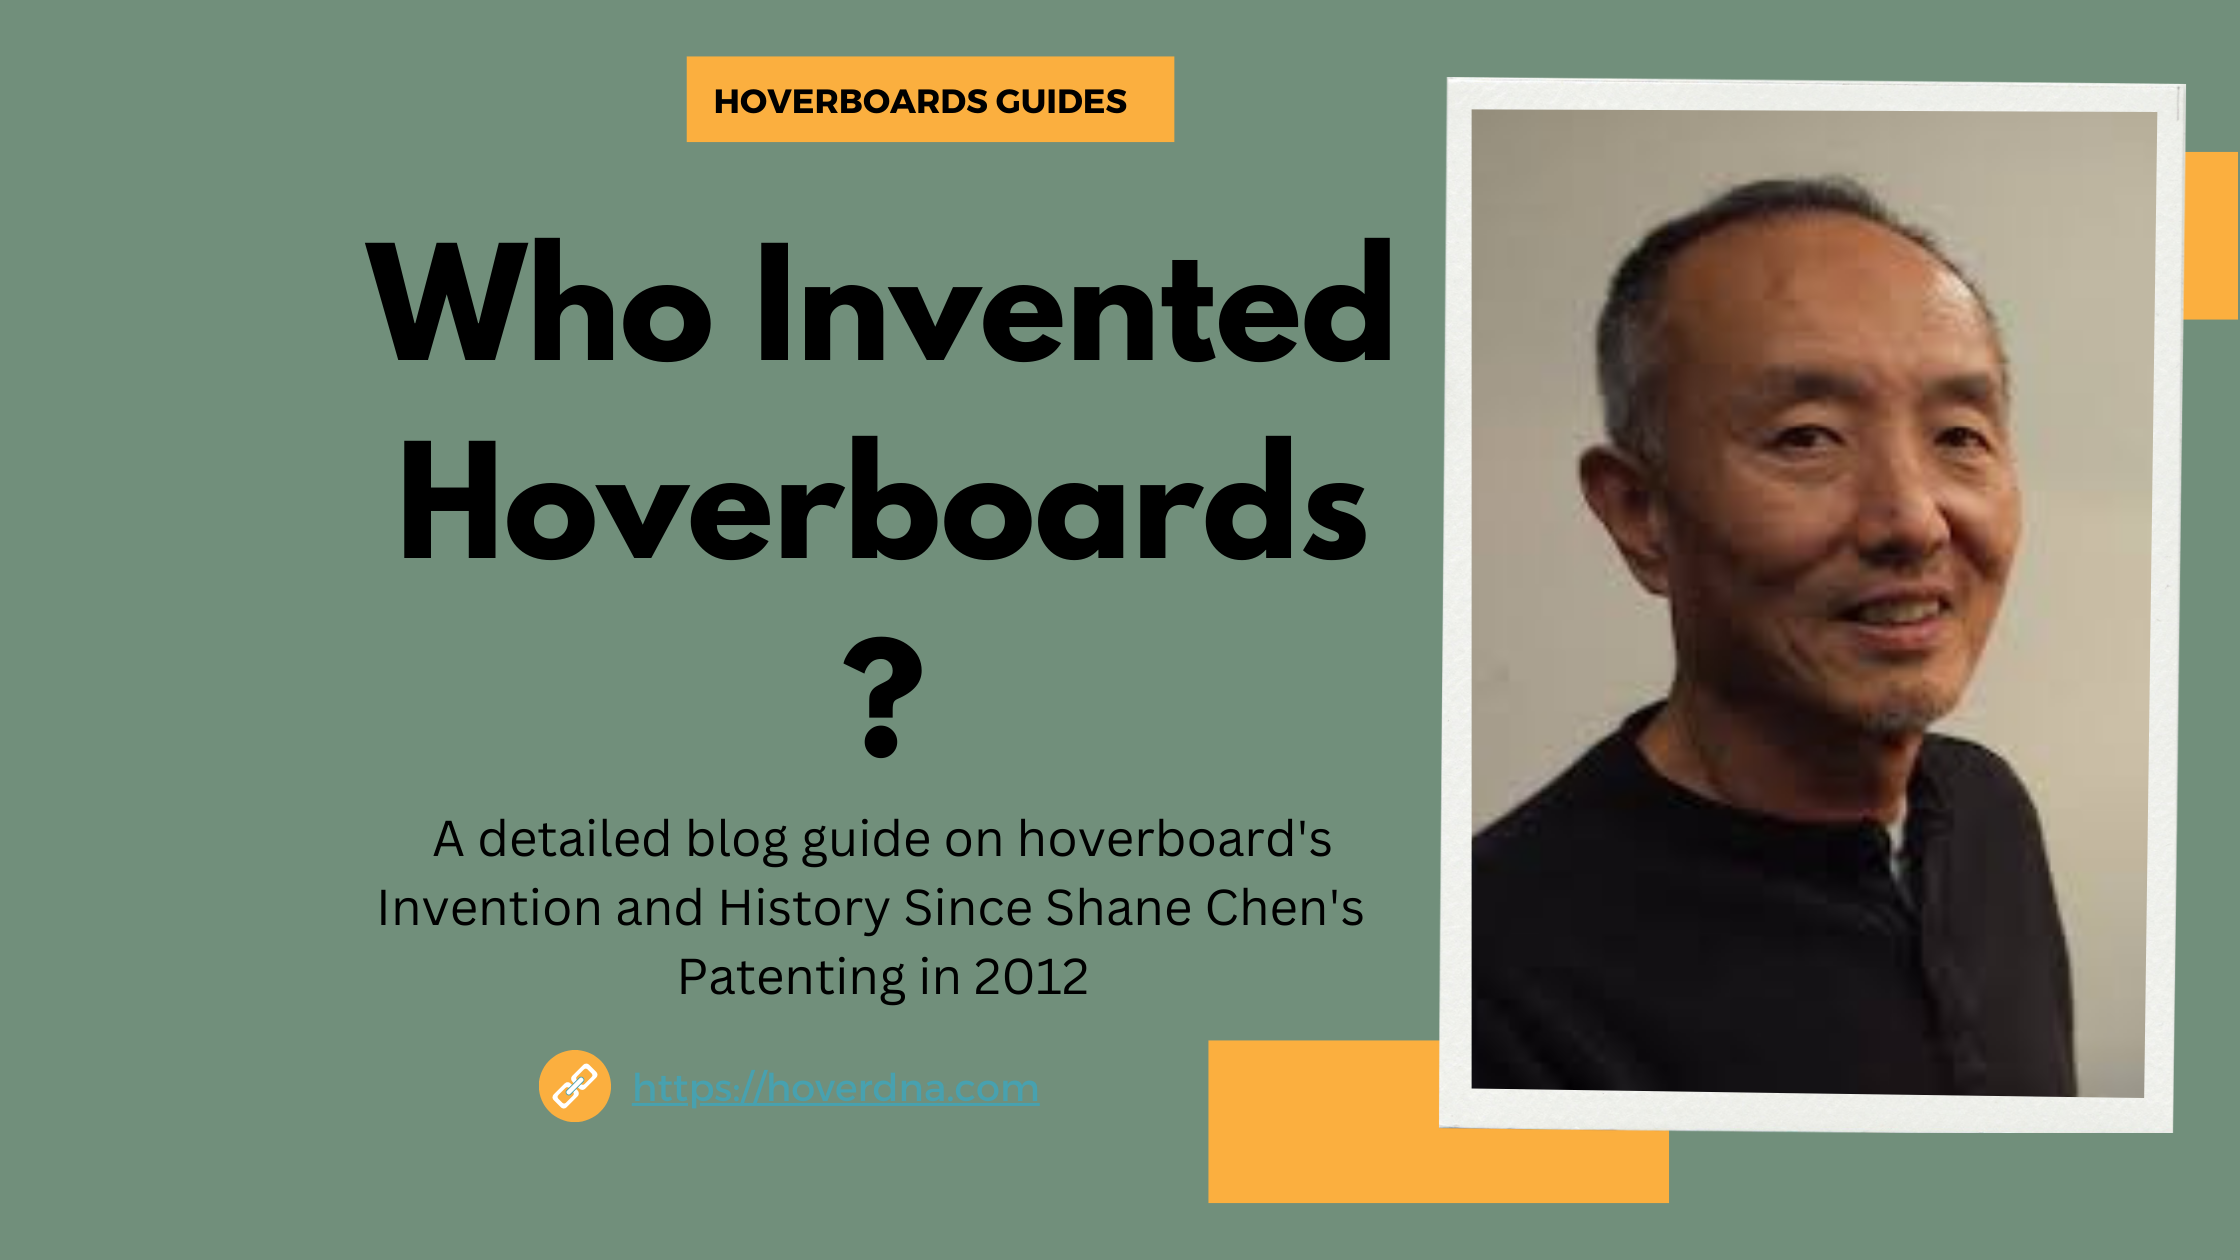 Who invented hoverboards